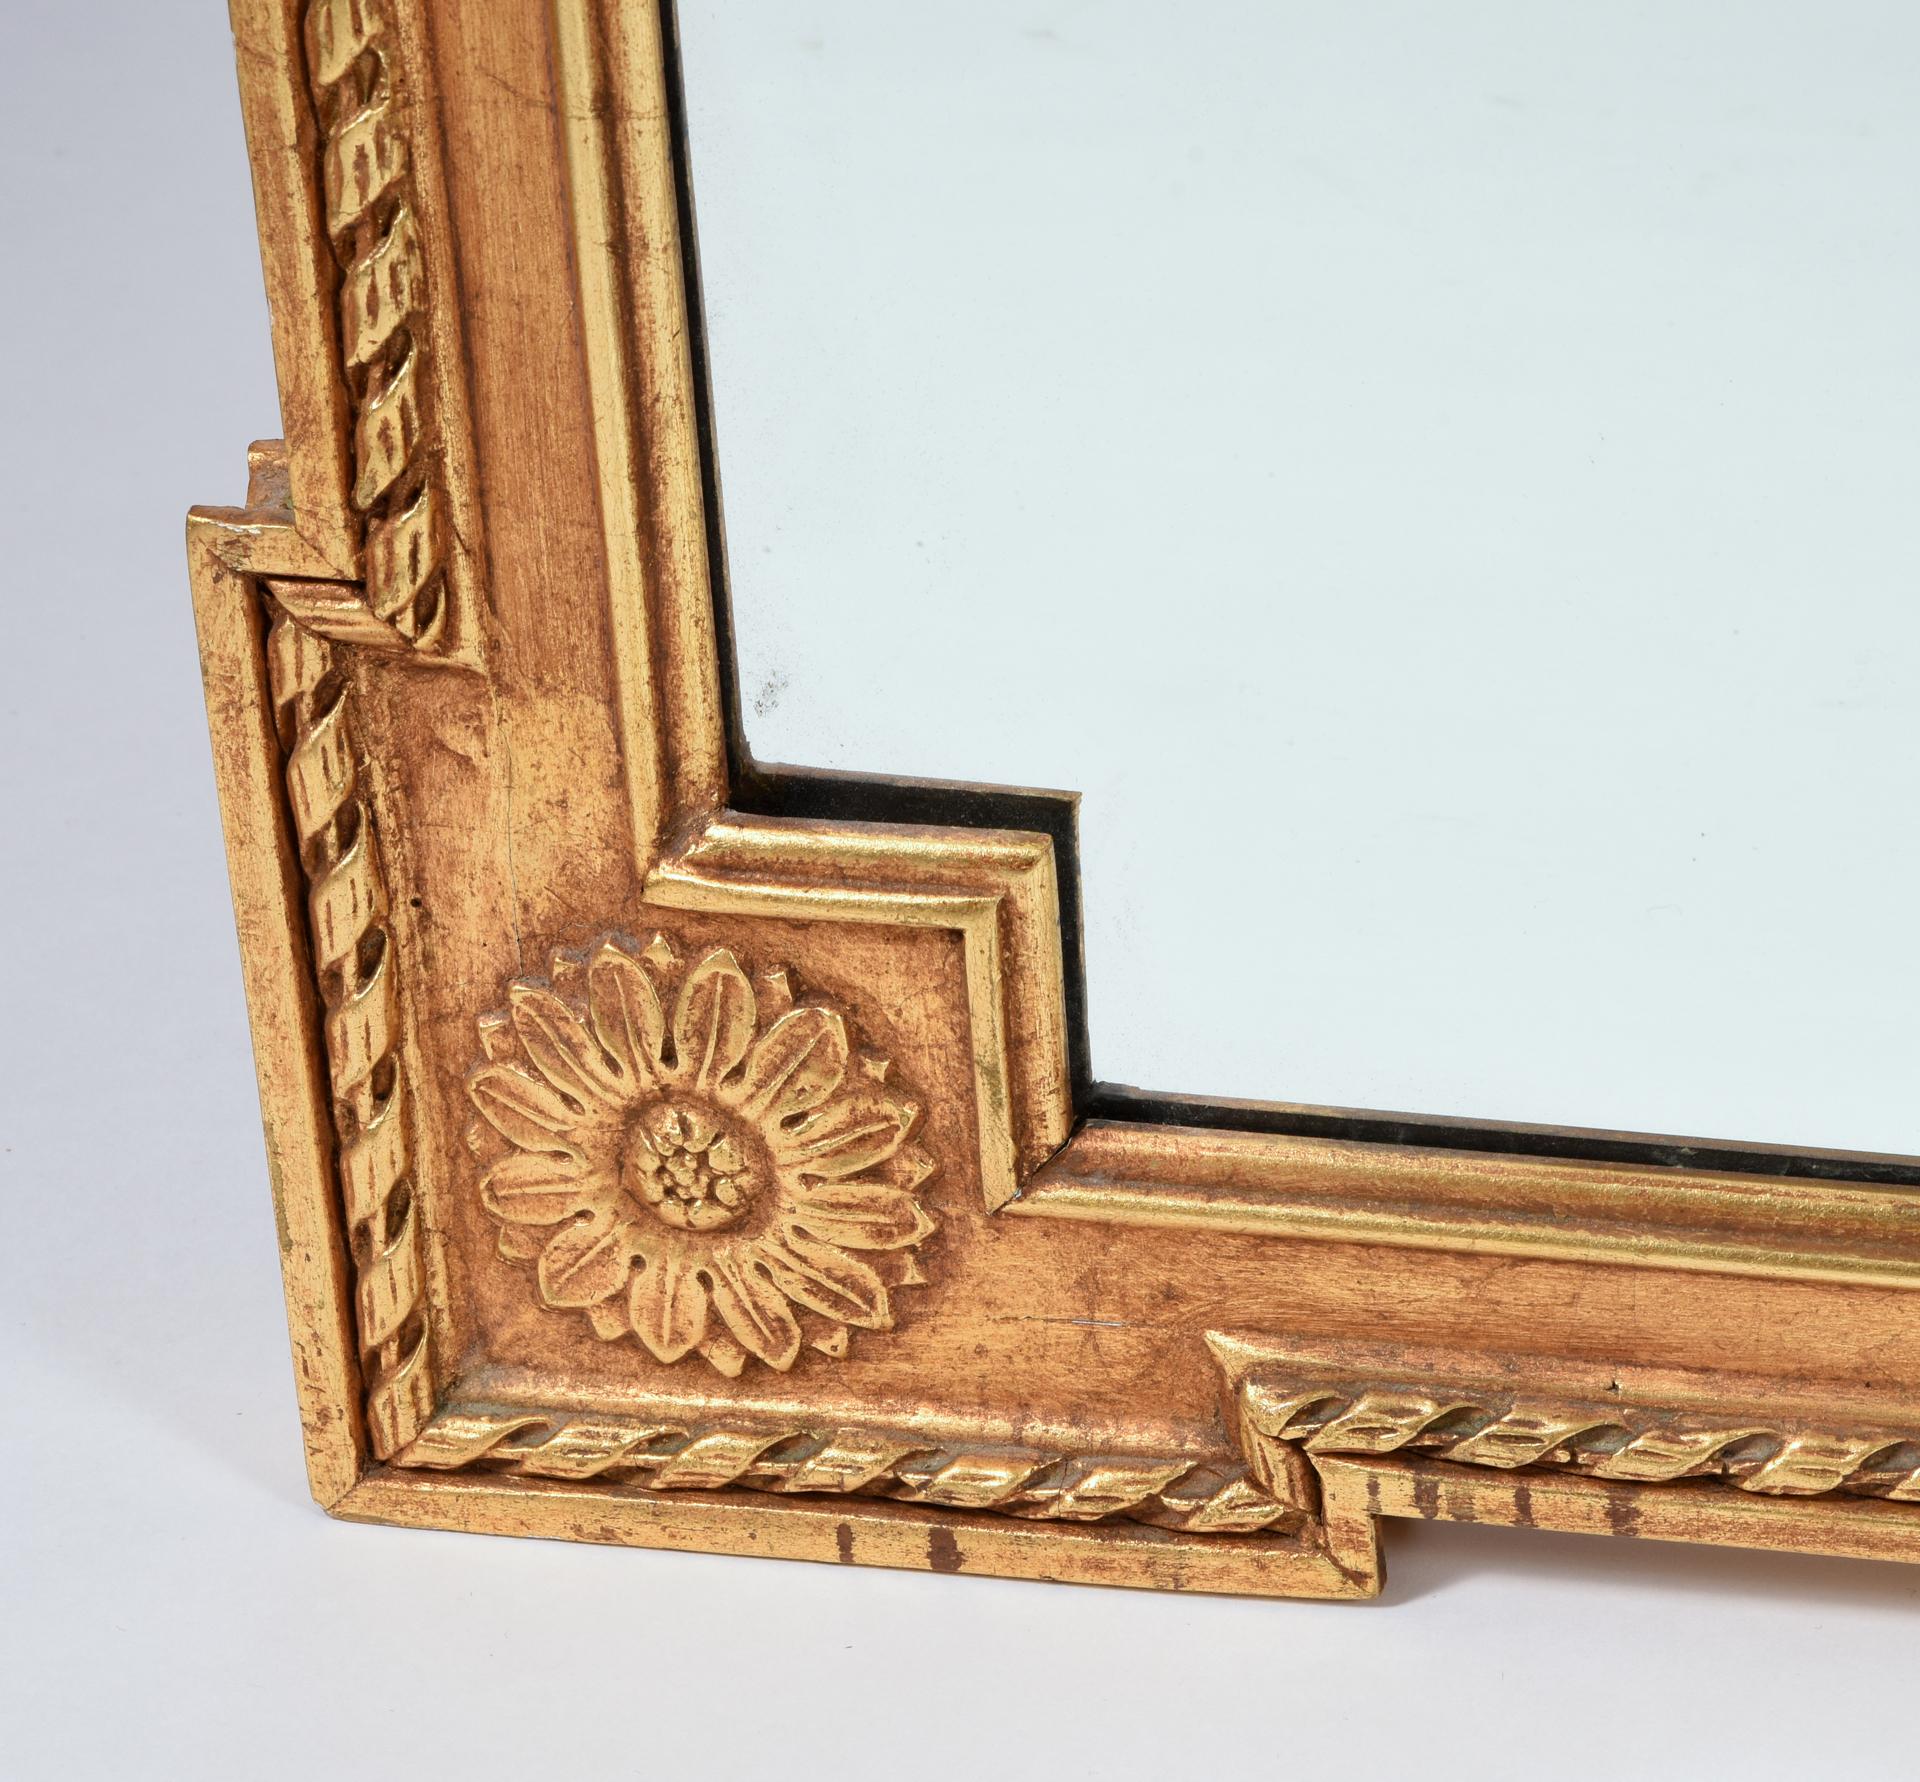 European Early 20th Century Matching Pair of Giltwood Hanging Beveled Mirrors